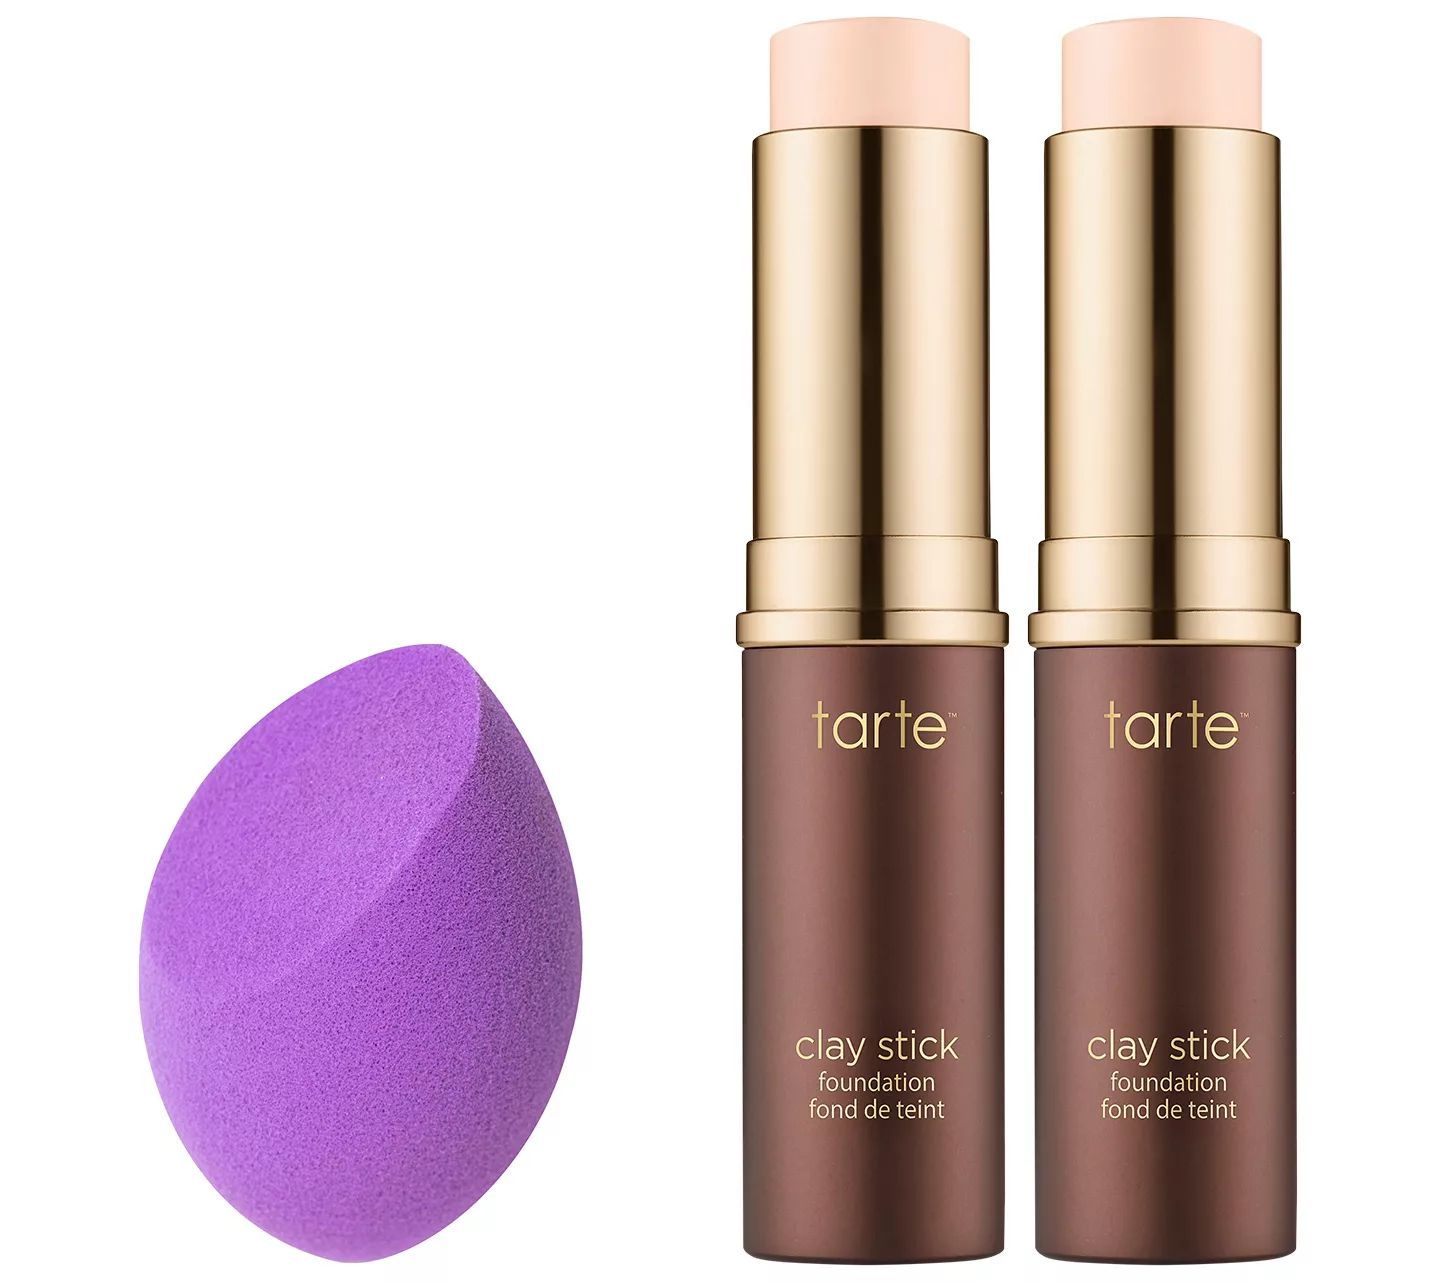 tarte Super-Size Clay Stick Foundation Duo with Sponge | QVC